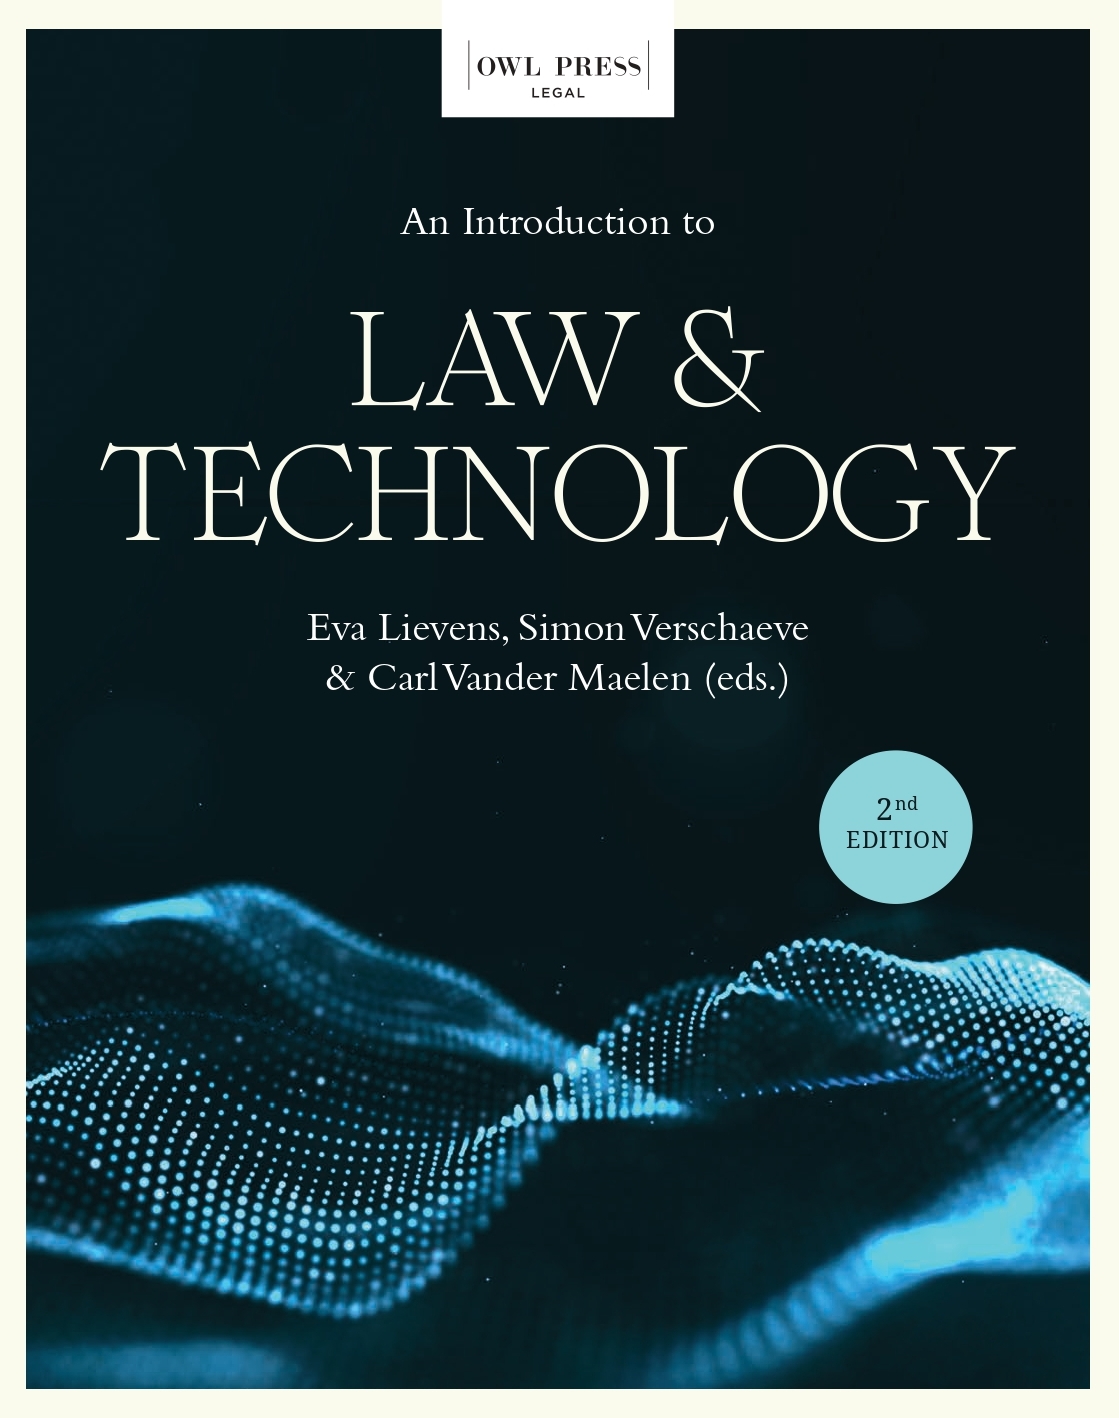 An Introduction to Law & Technology